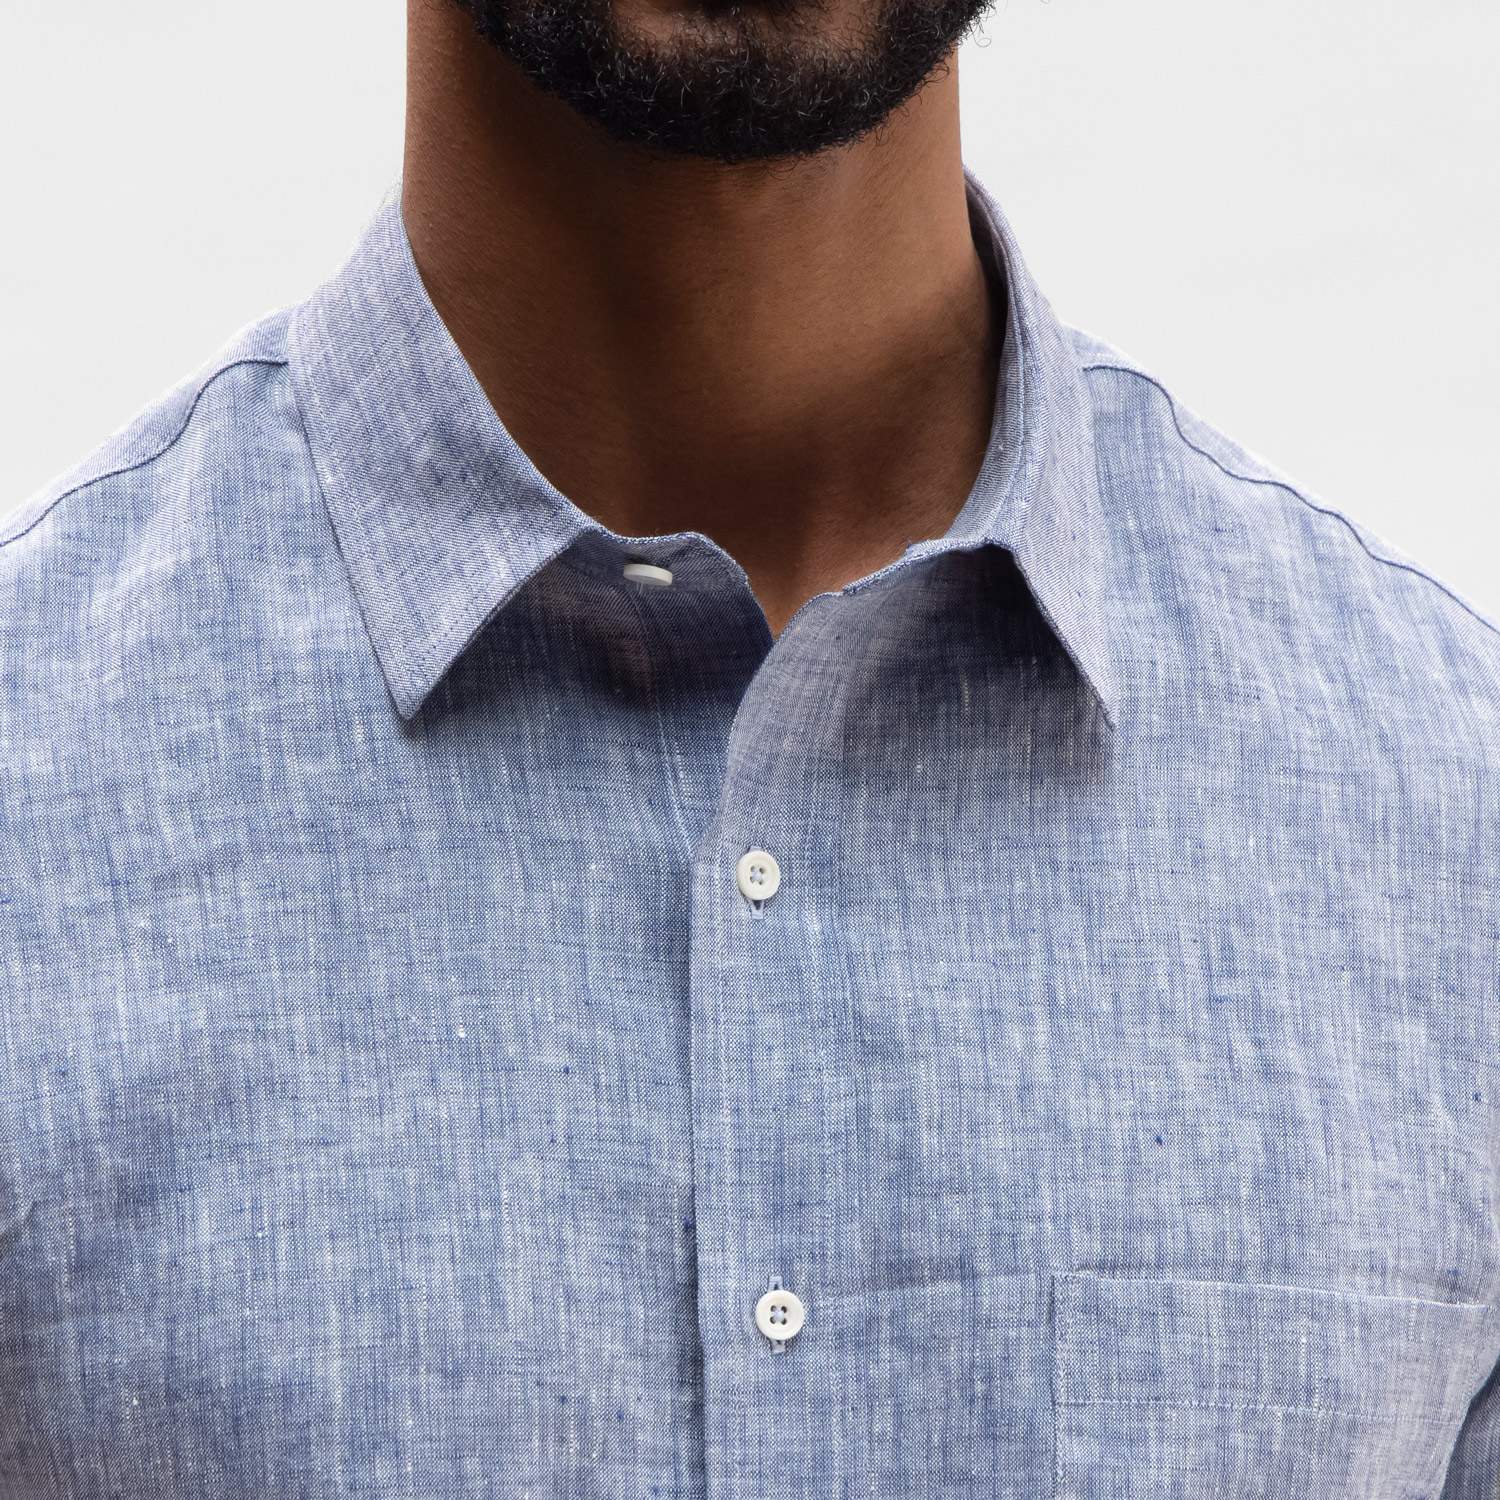 Portuguese Linen Navy - Shirt made in USA from Portuguese fabric